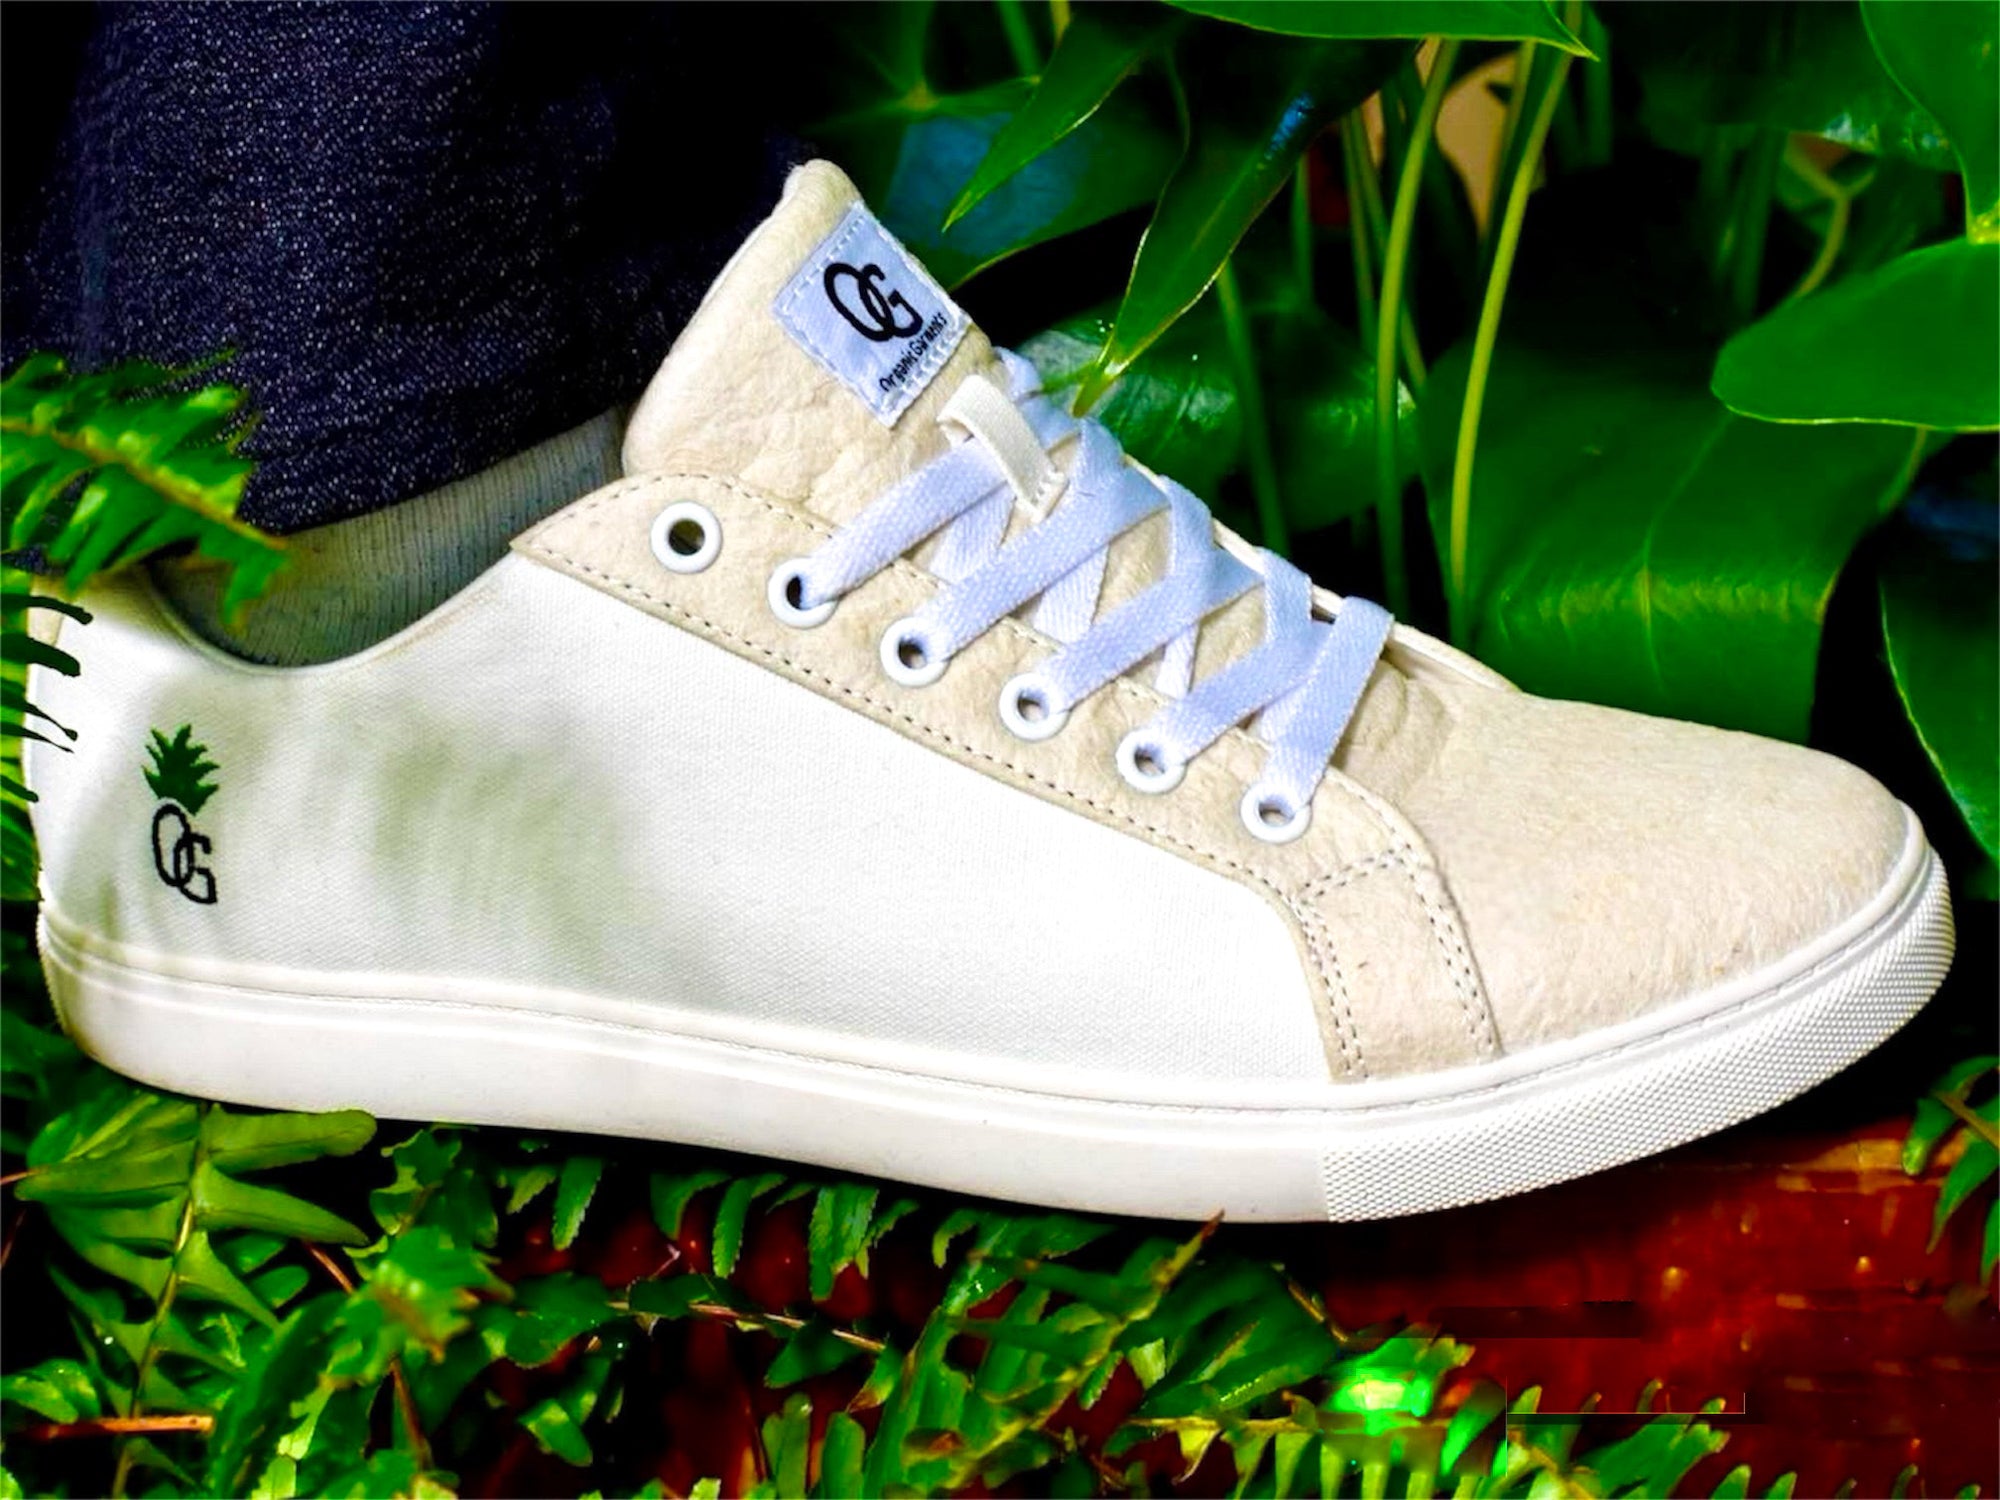 3 Reasons Why You Should Shop OG Sustainable Sneakers